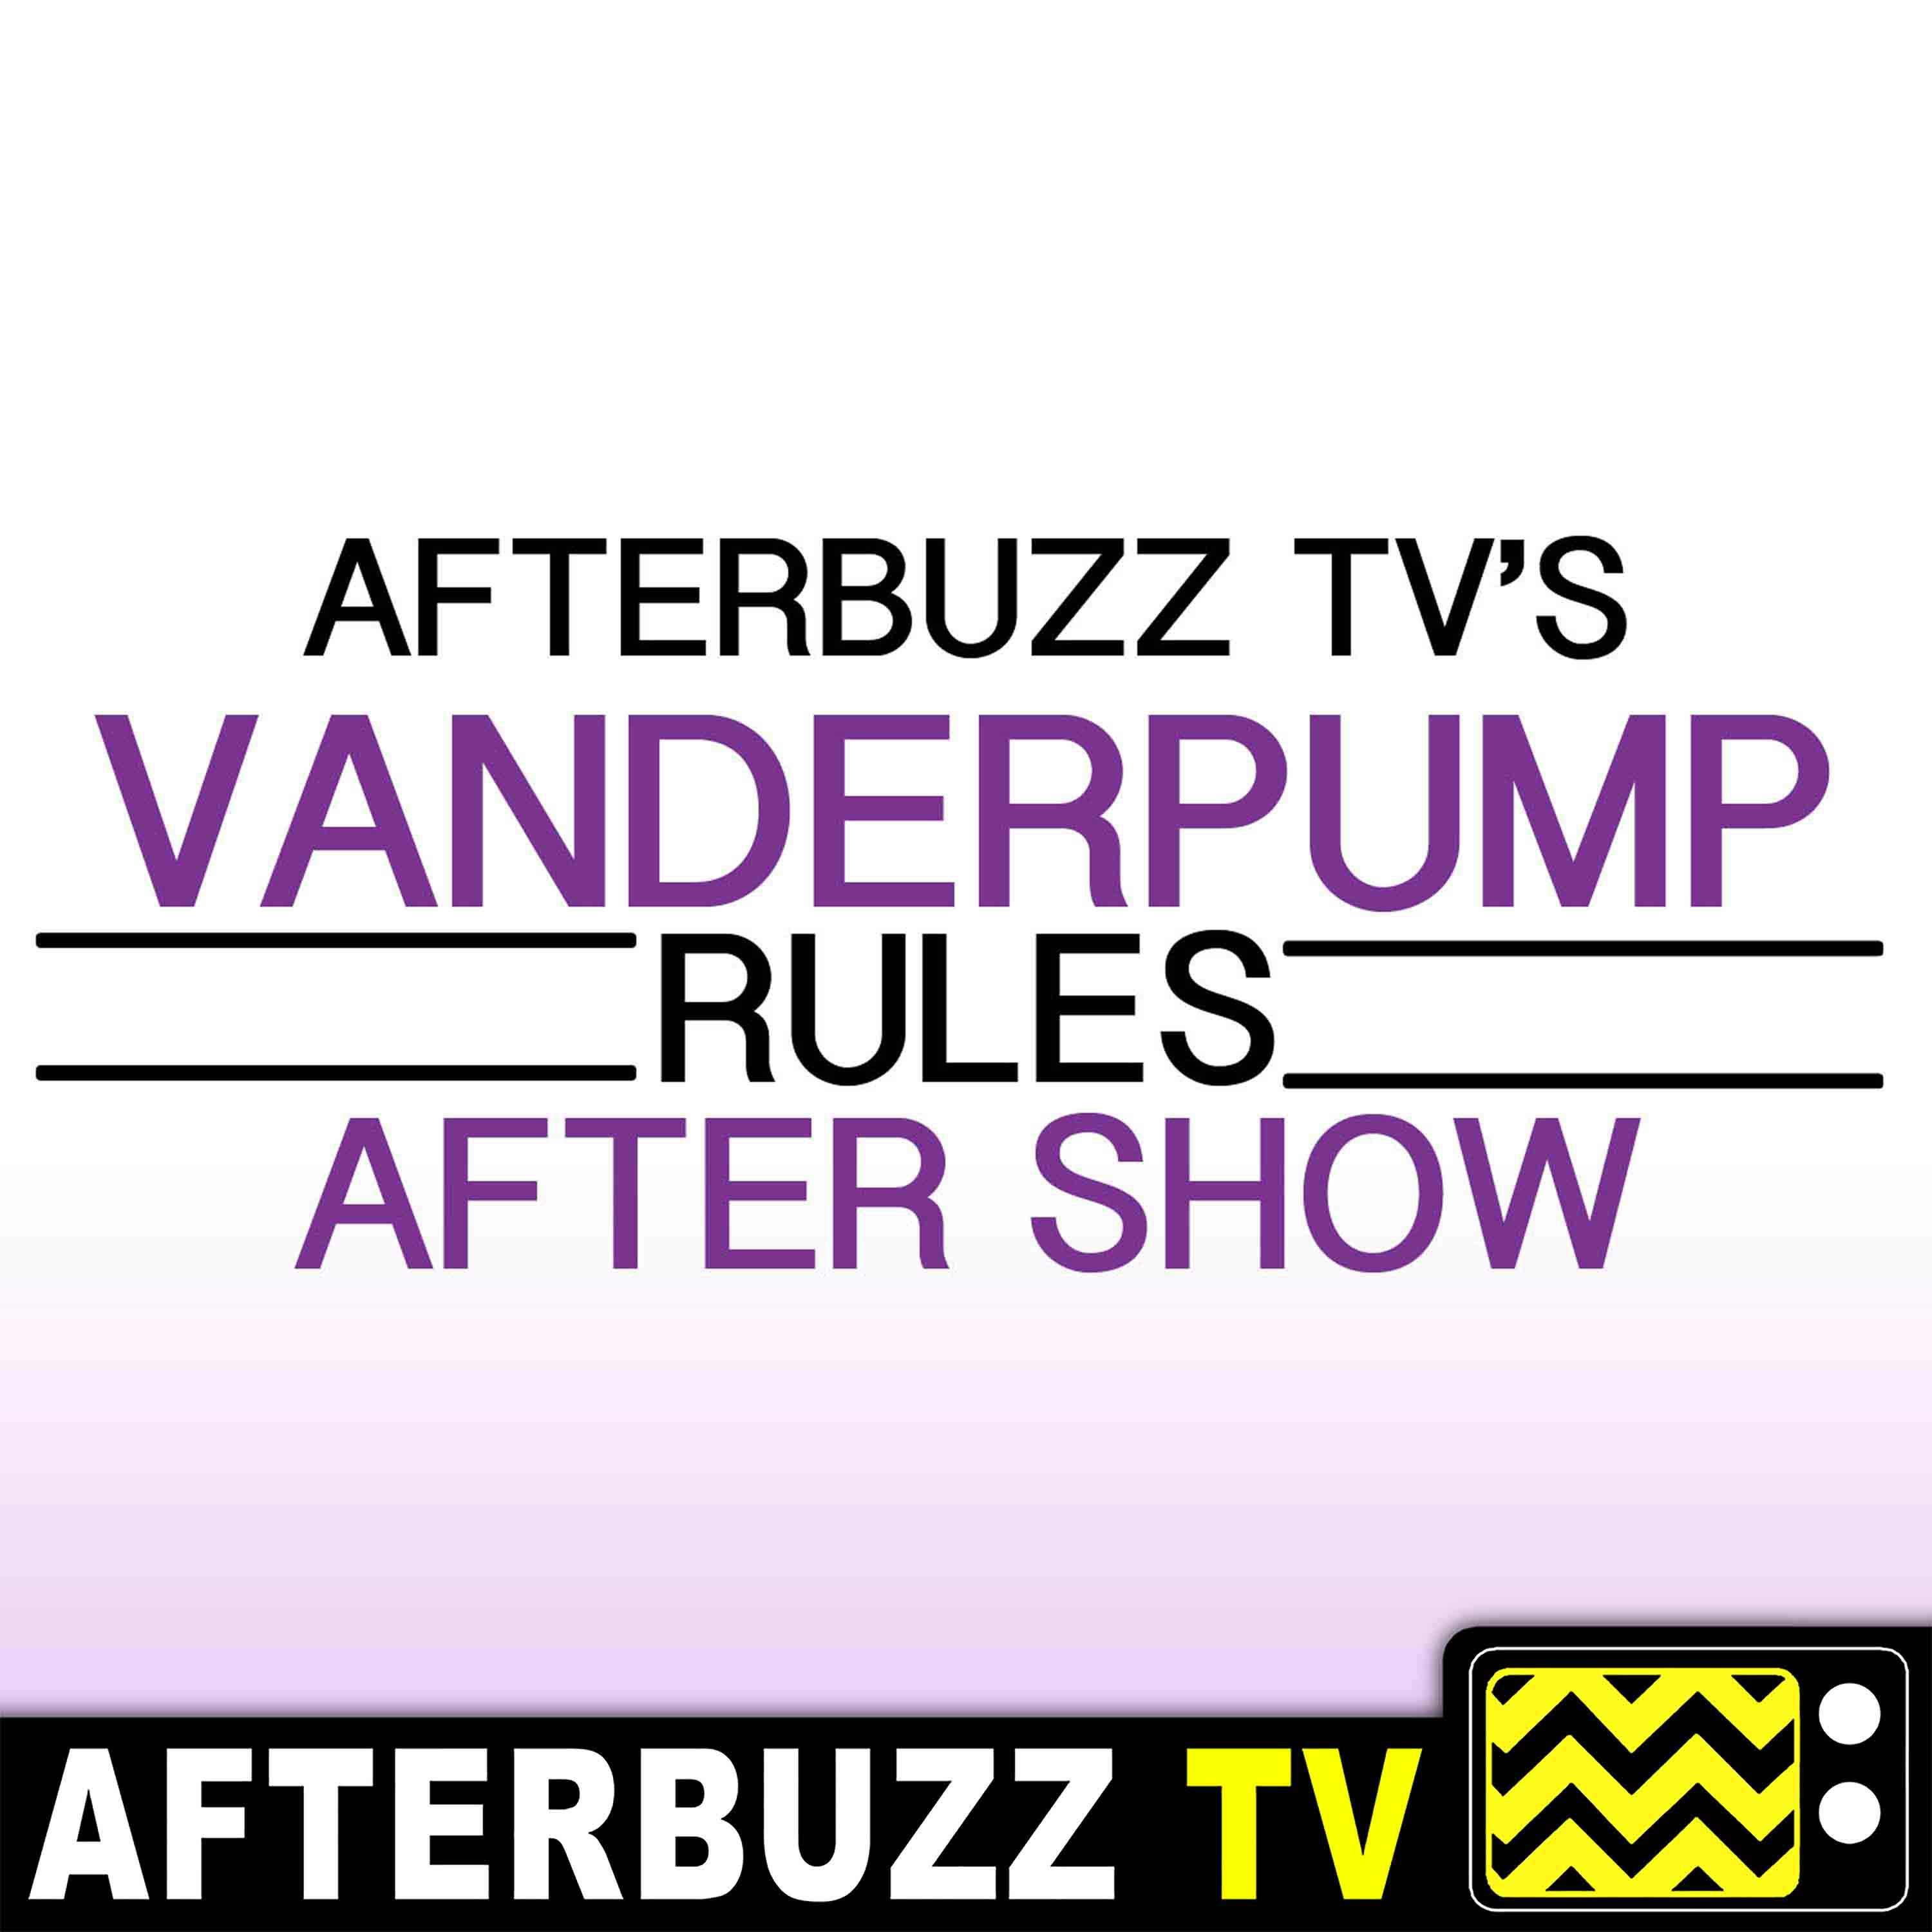 Witches of We Hope This Friendship Can Be Mended - S8 E16 'Vanderpump Rules' Recap & After Show